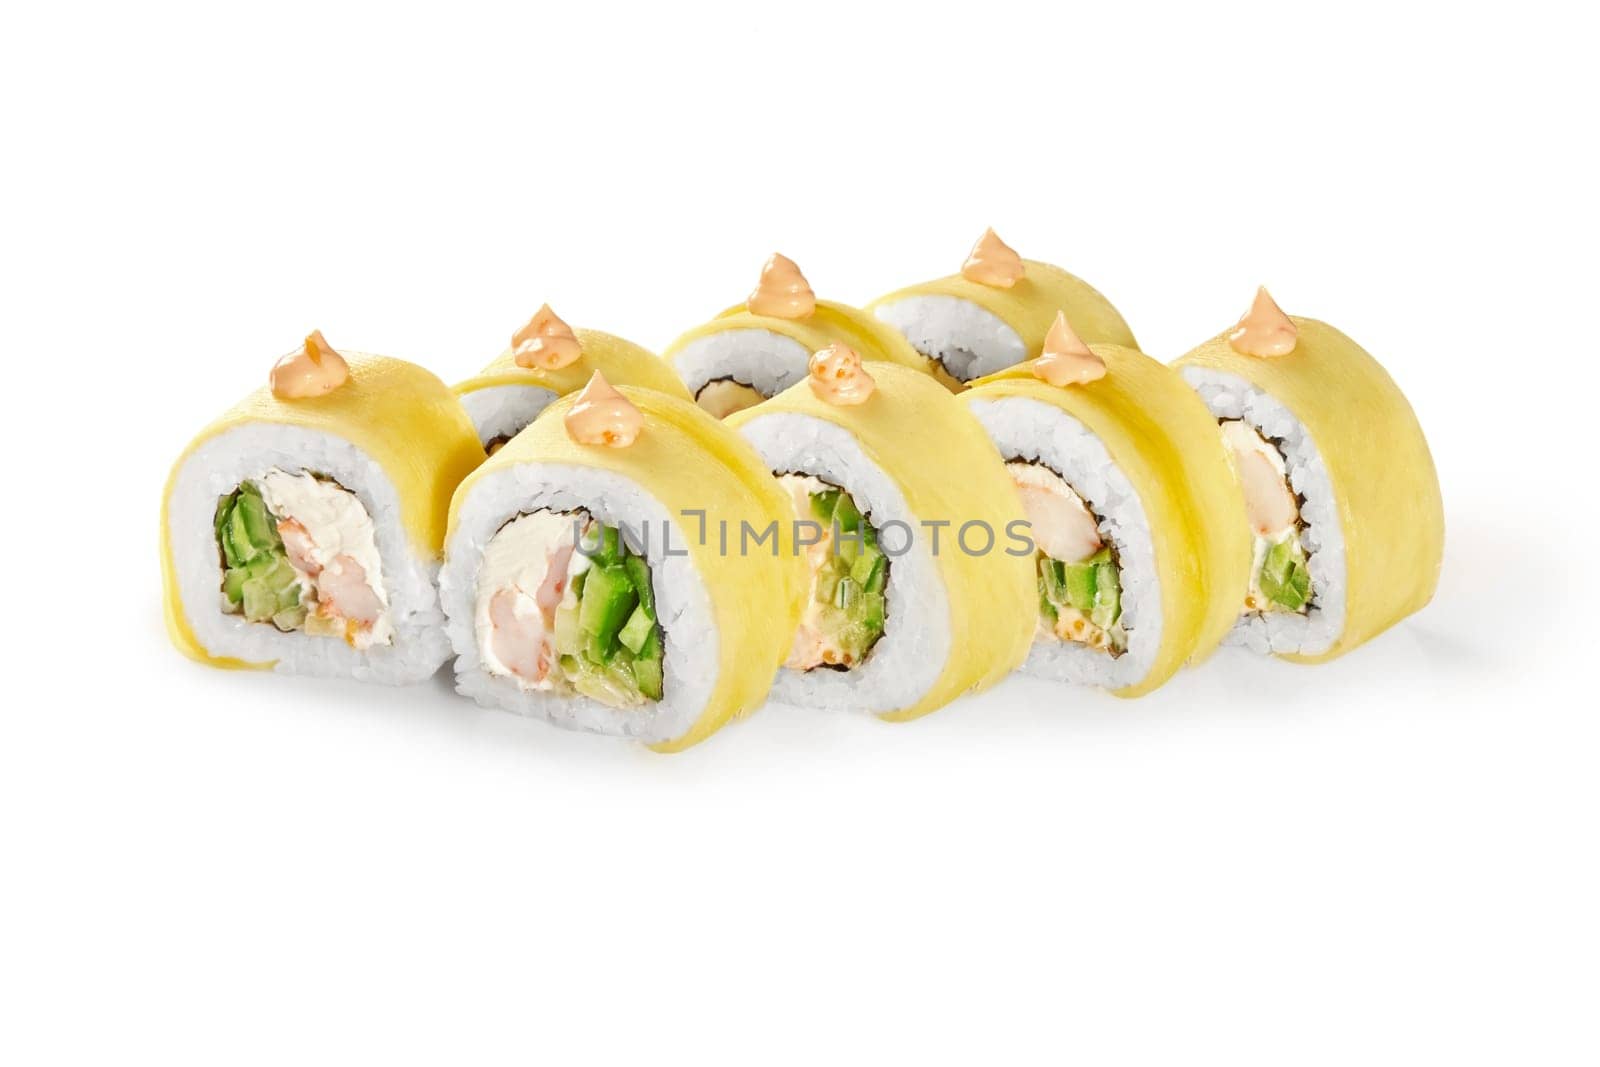 Exotic sushi rolls filled with crab, cream cheese, and cucumber, topped with mango slices and spicy mayo, presented on white background. Japanese style cuisine